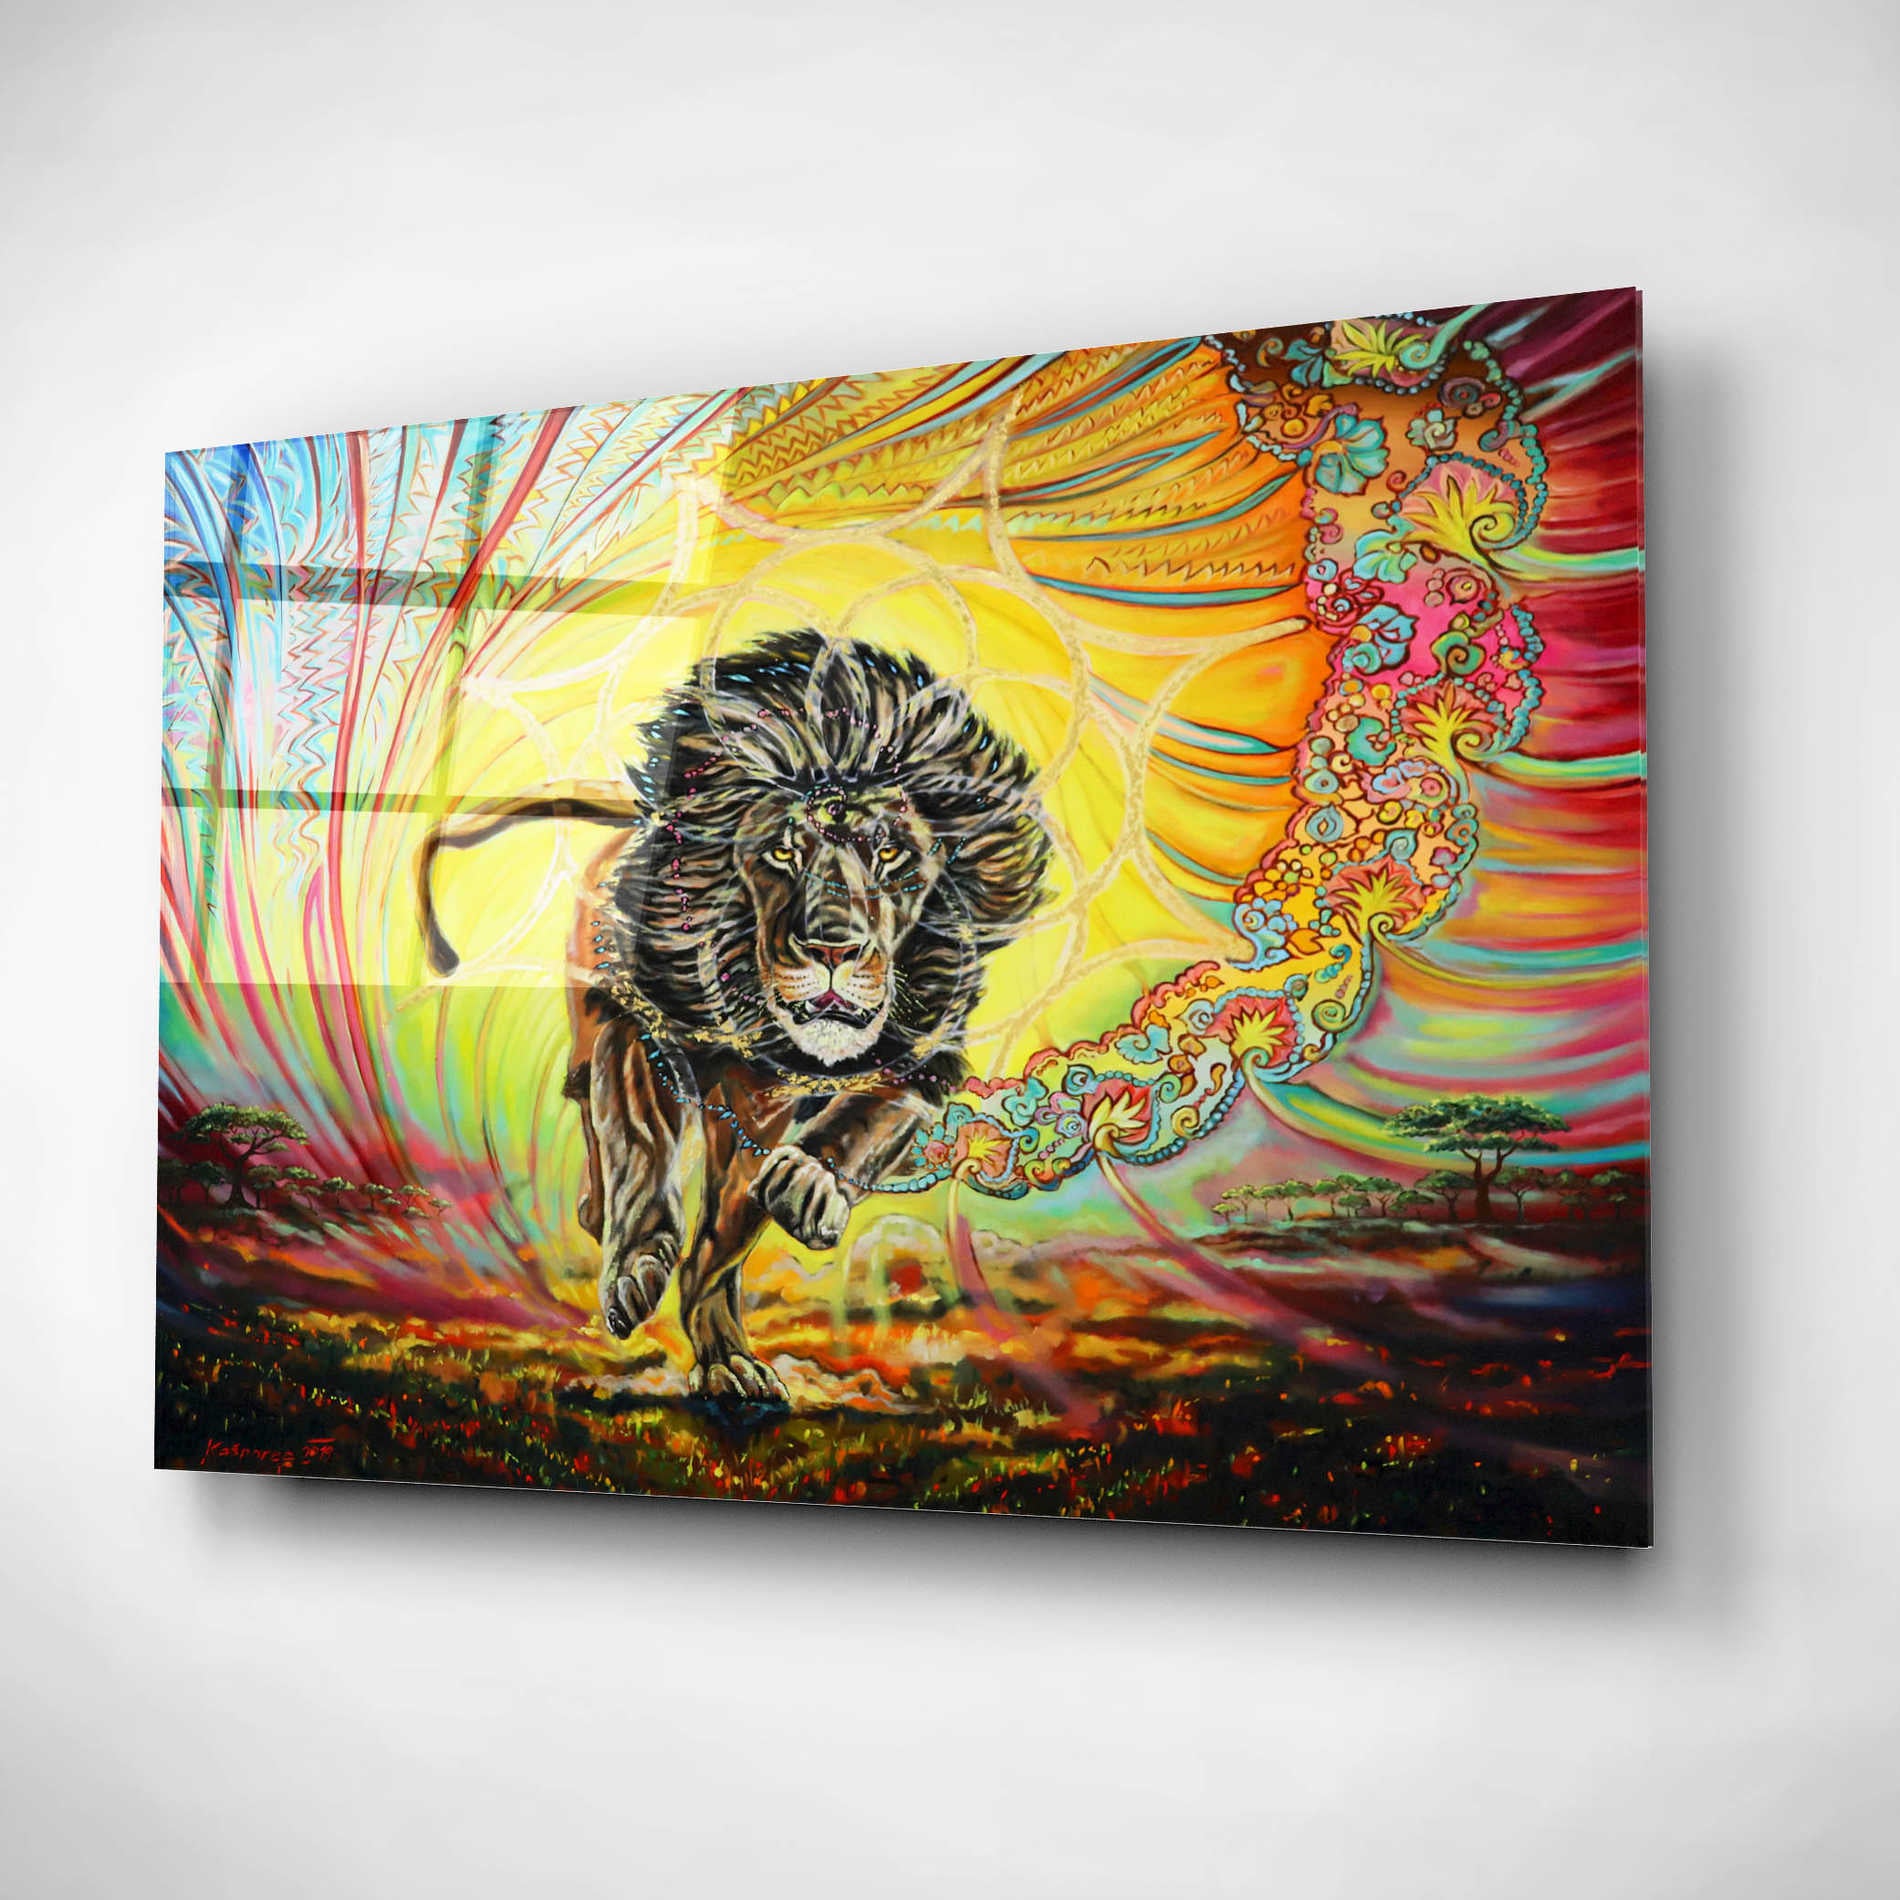 Epic Art 'Strenth And Honor' by Jan Kasparec, Acrylic Glass Wall Art,16x12